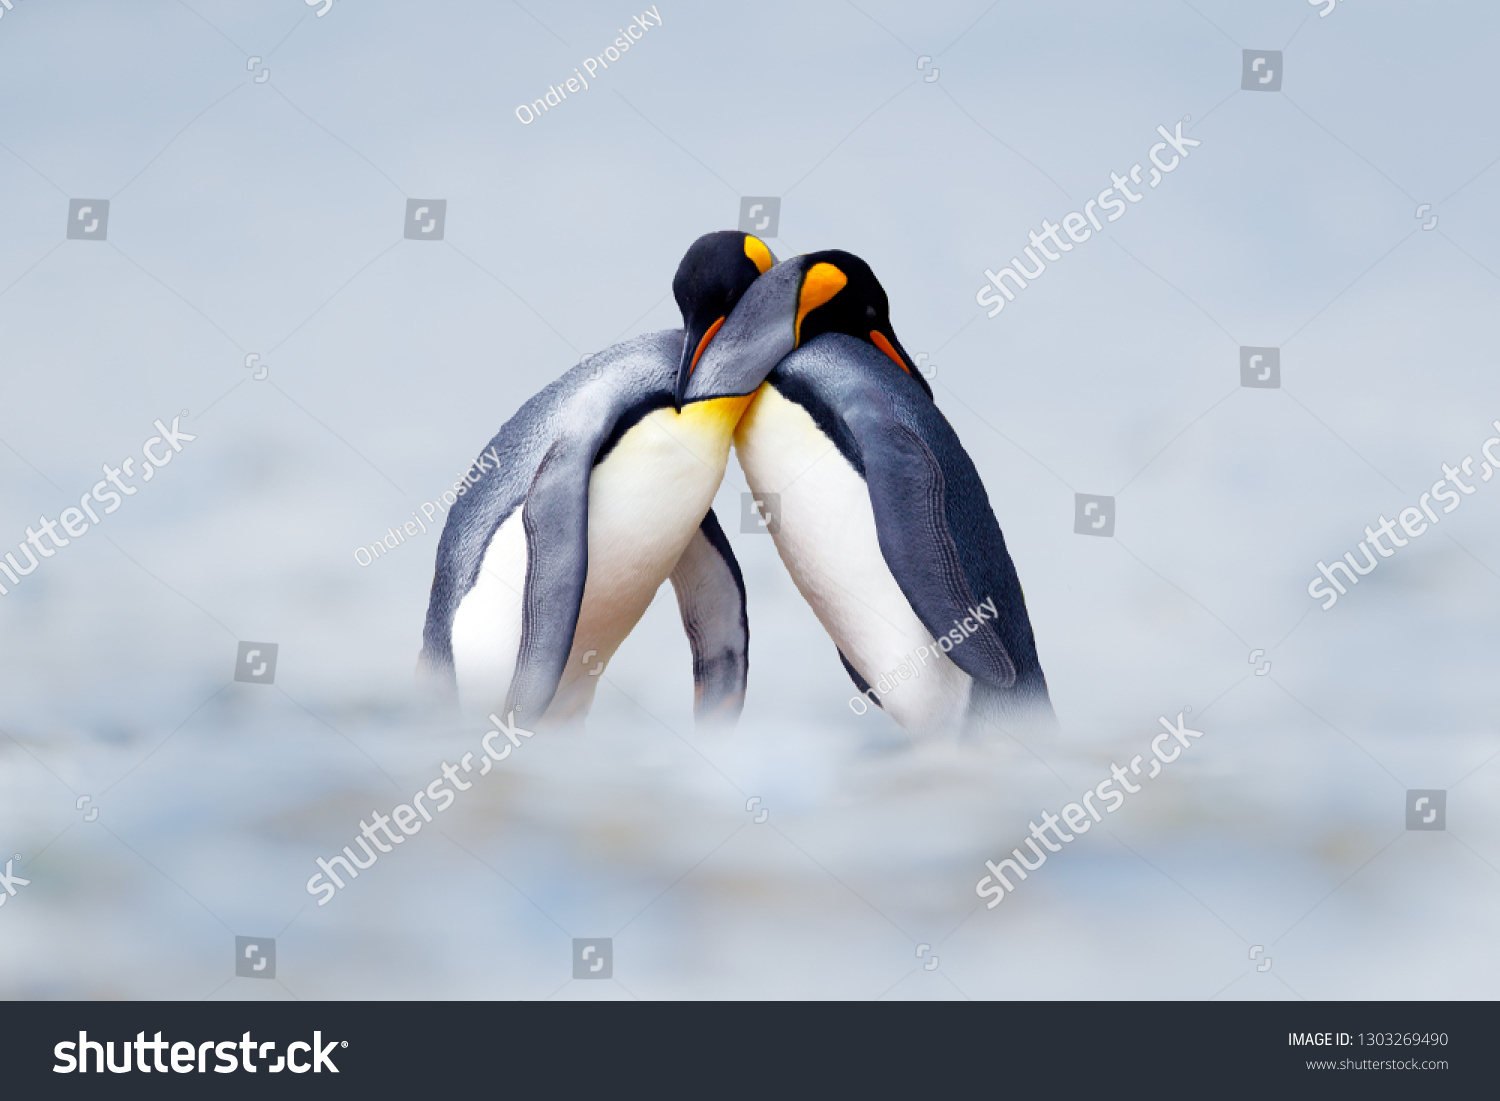 King penguin mating couple cuddling in wild nature, snow and ice. Pair two penguins making love. Wildlife scene from white nature. Bird behavior, wildlife scene from nature, South Georgia, Antarctica. #1303269490